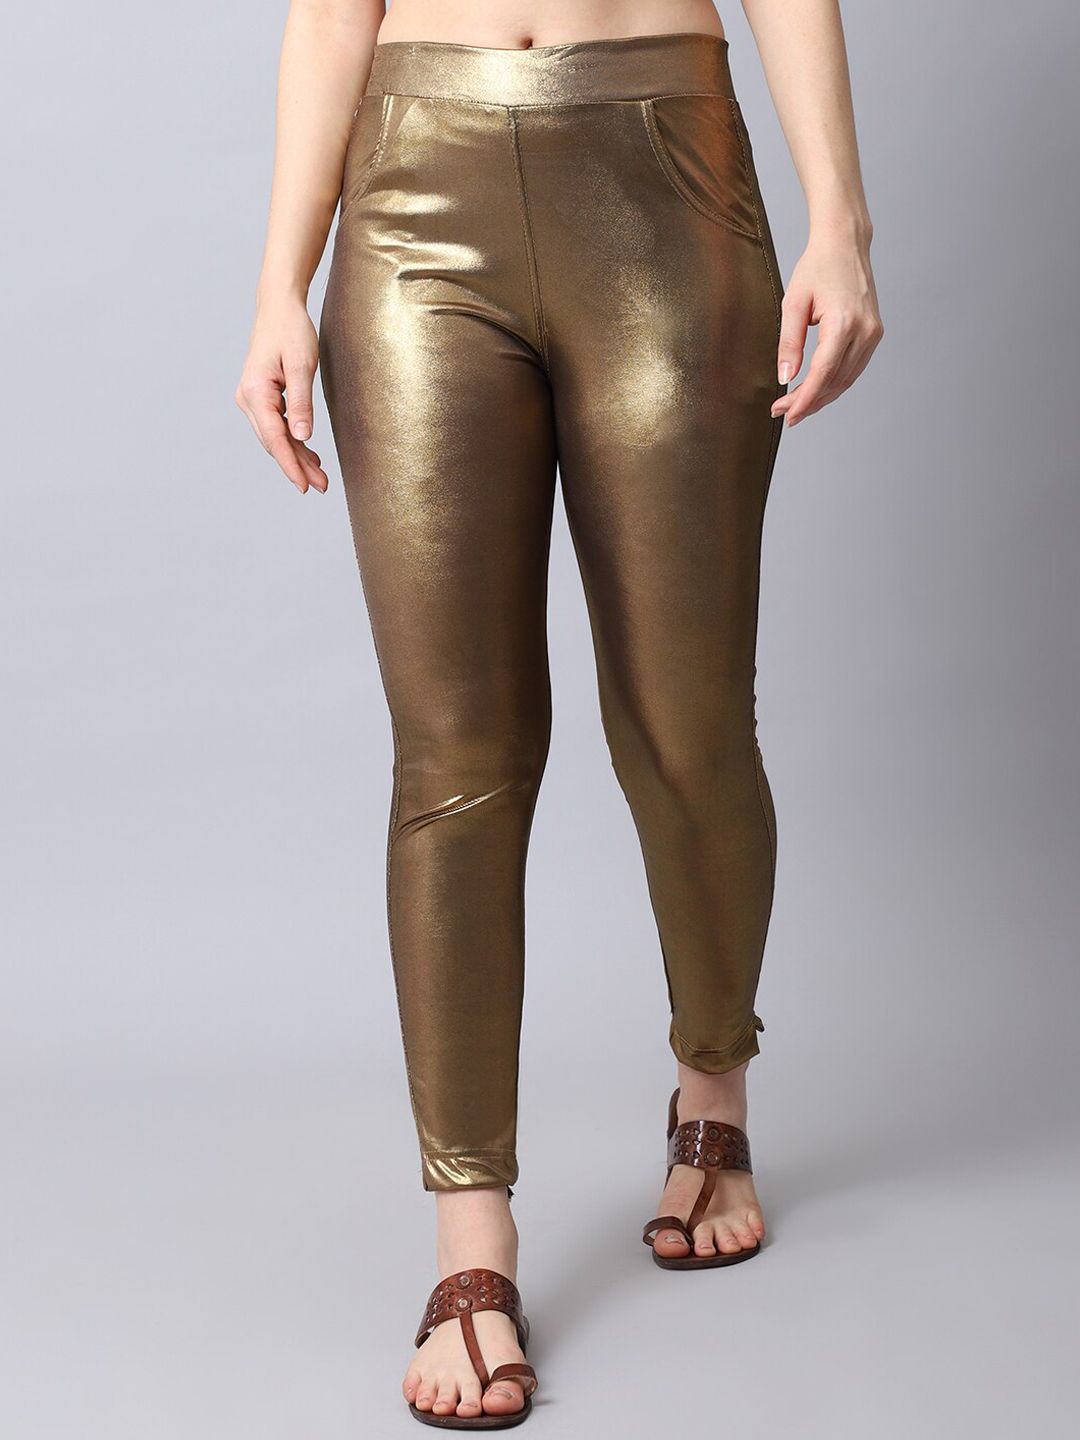 TAG 7 Women Copper Solid Ankle-Length Leggings Price in India